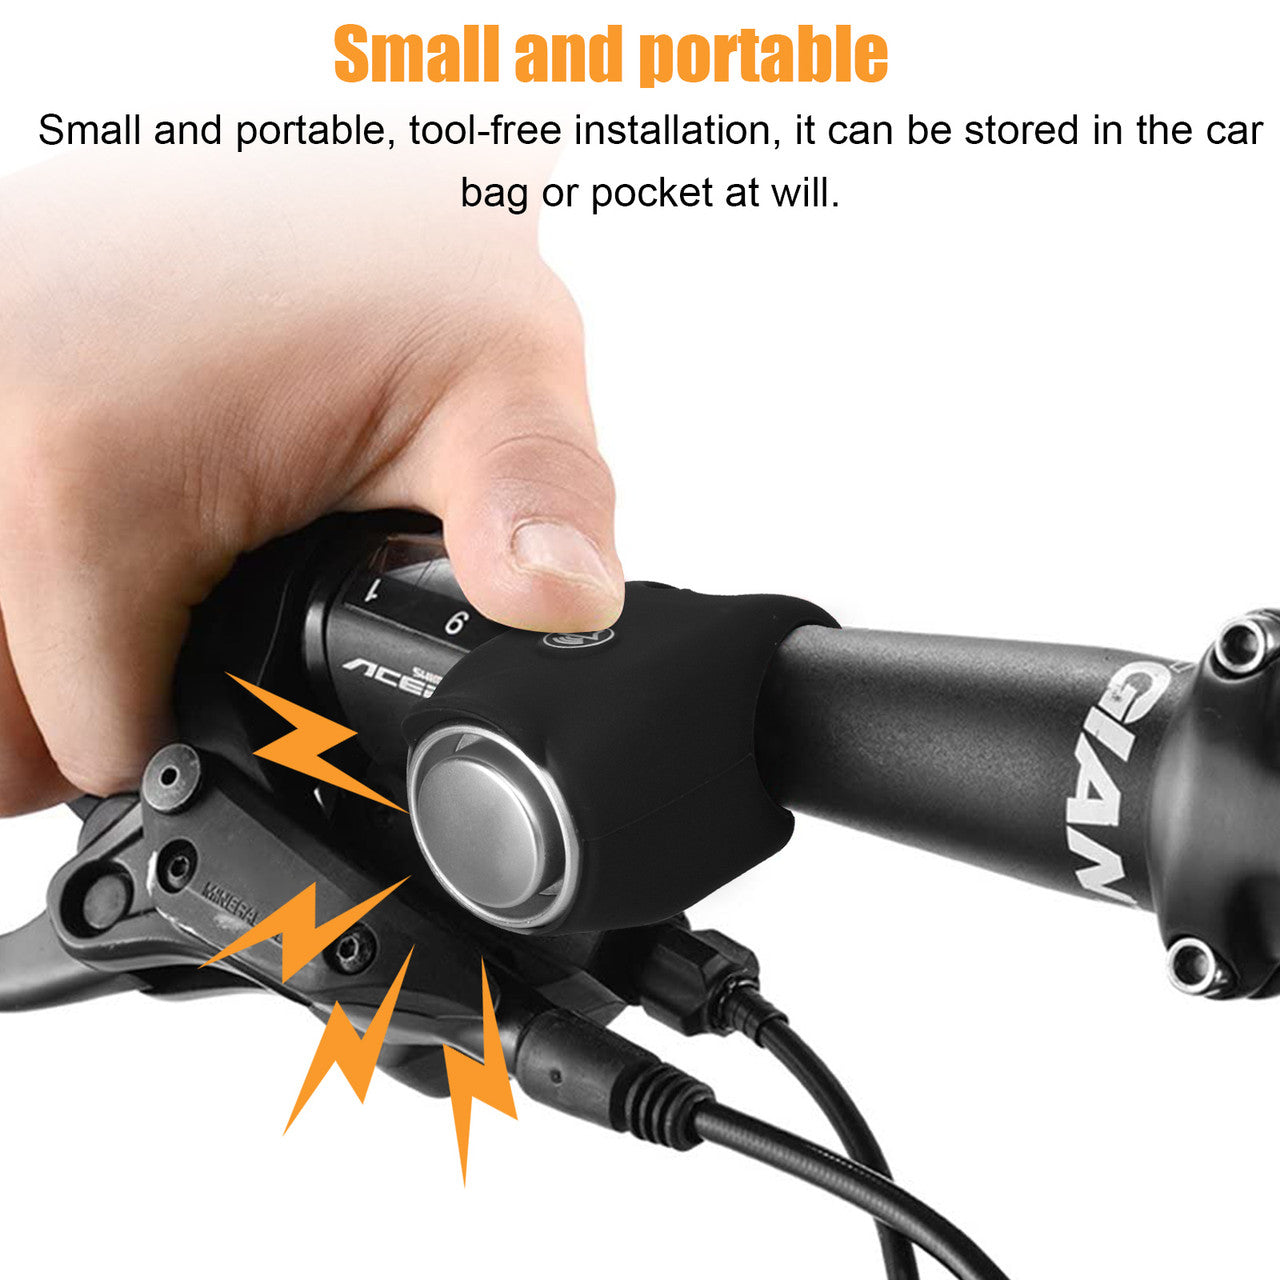 Super Bike Electric Horn - Portable Waterproof and Rainproof Mtb Bicycle Handlebar Bike Bell Silicone Material Shell Ring Bell (Black)